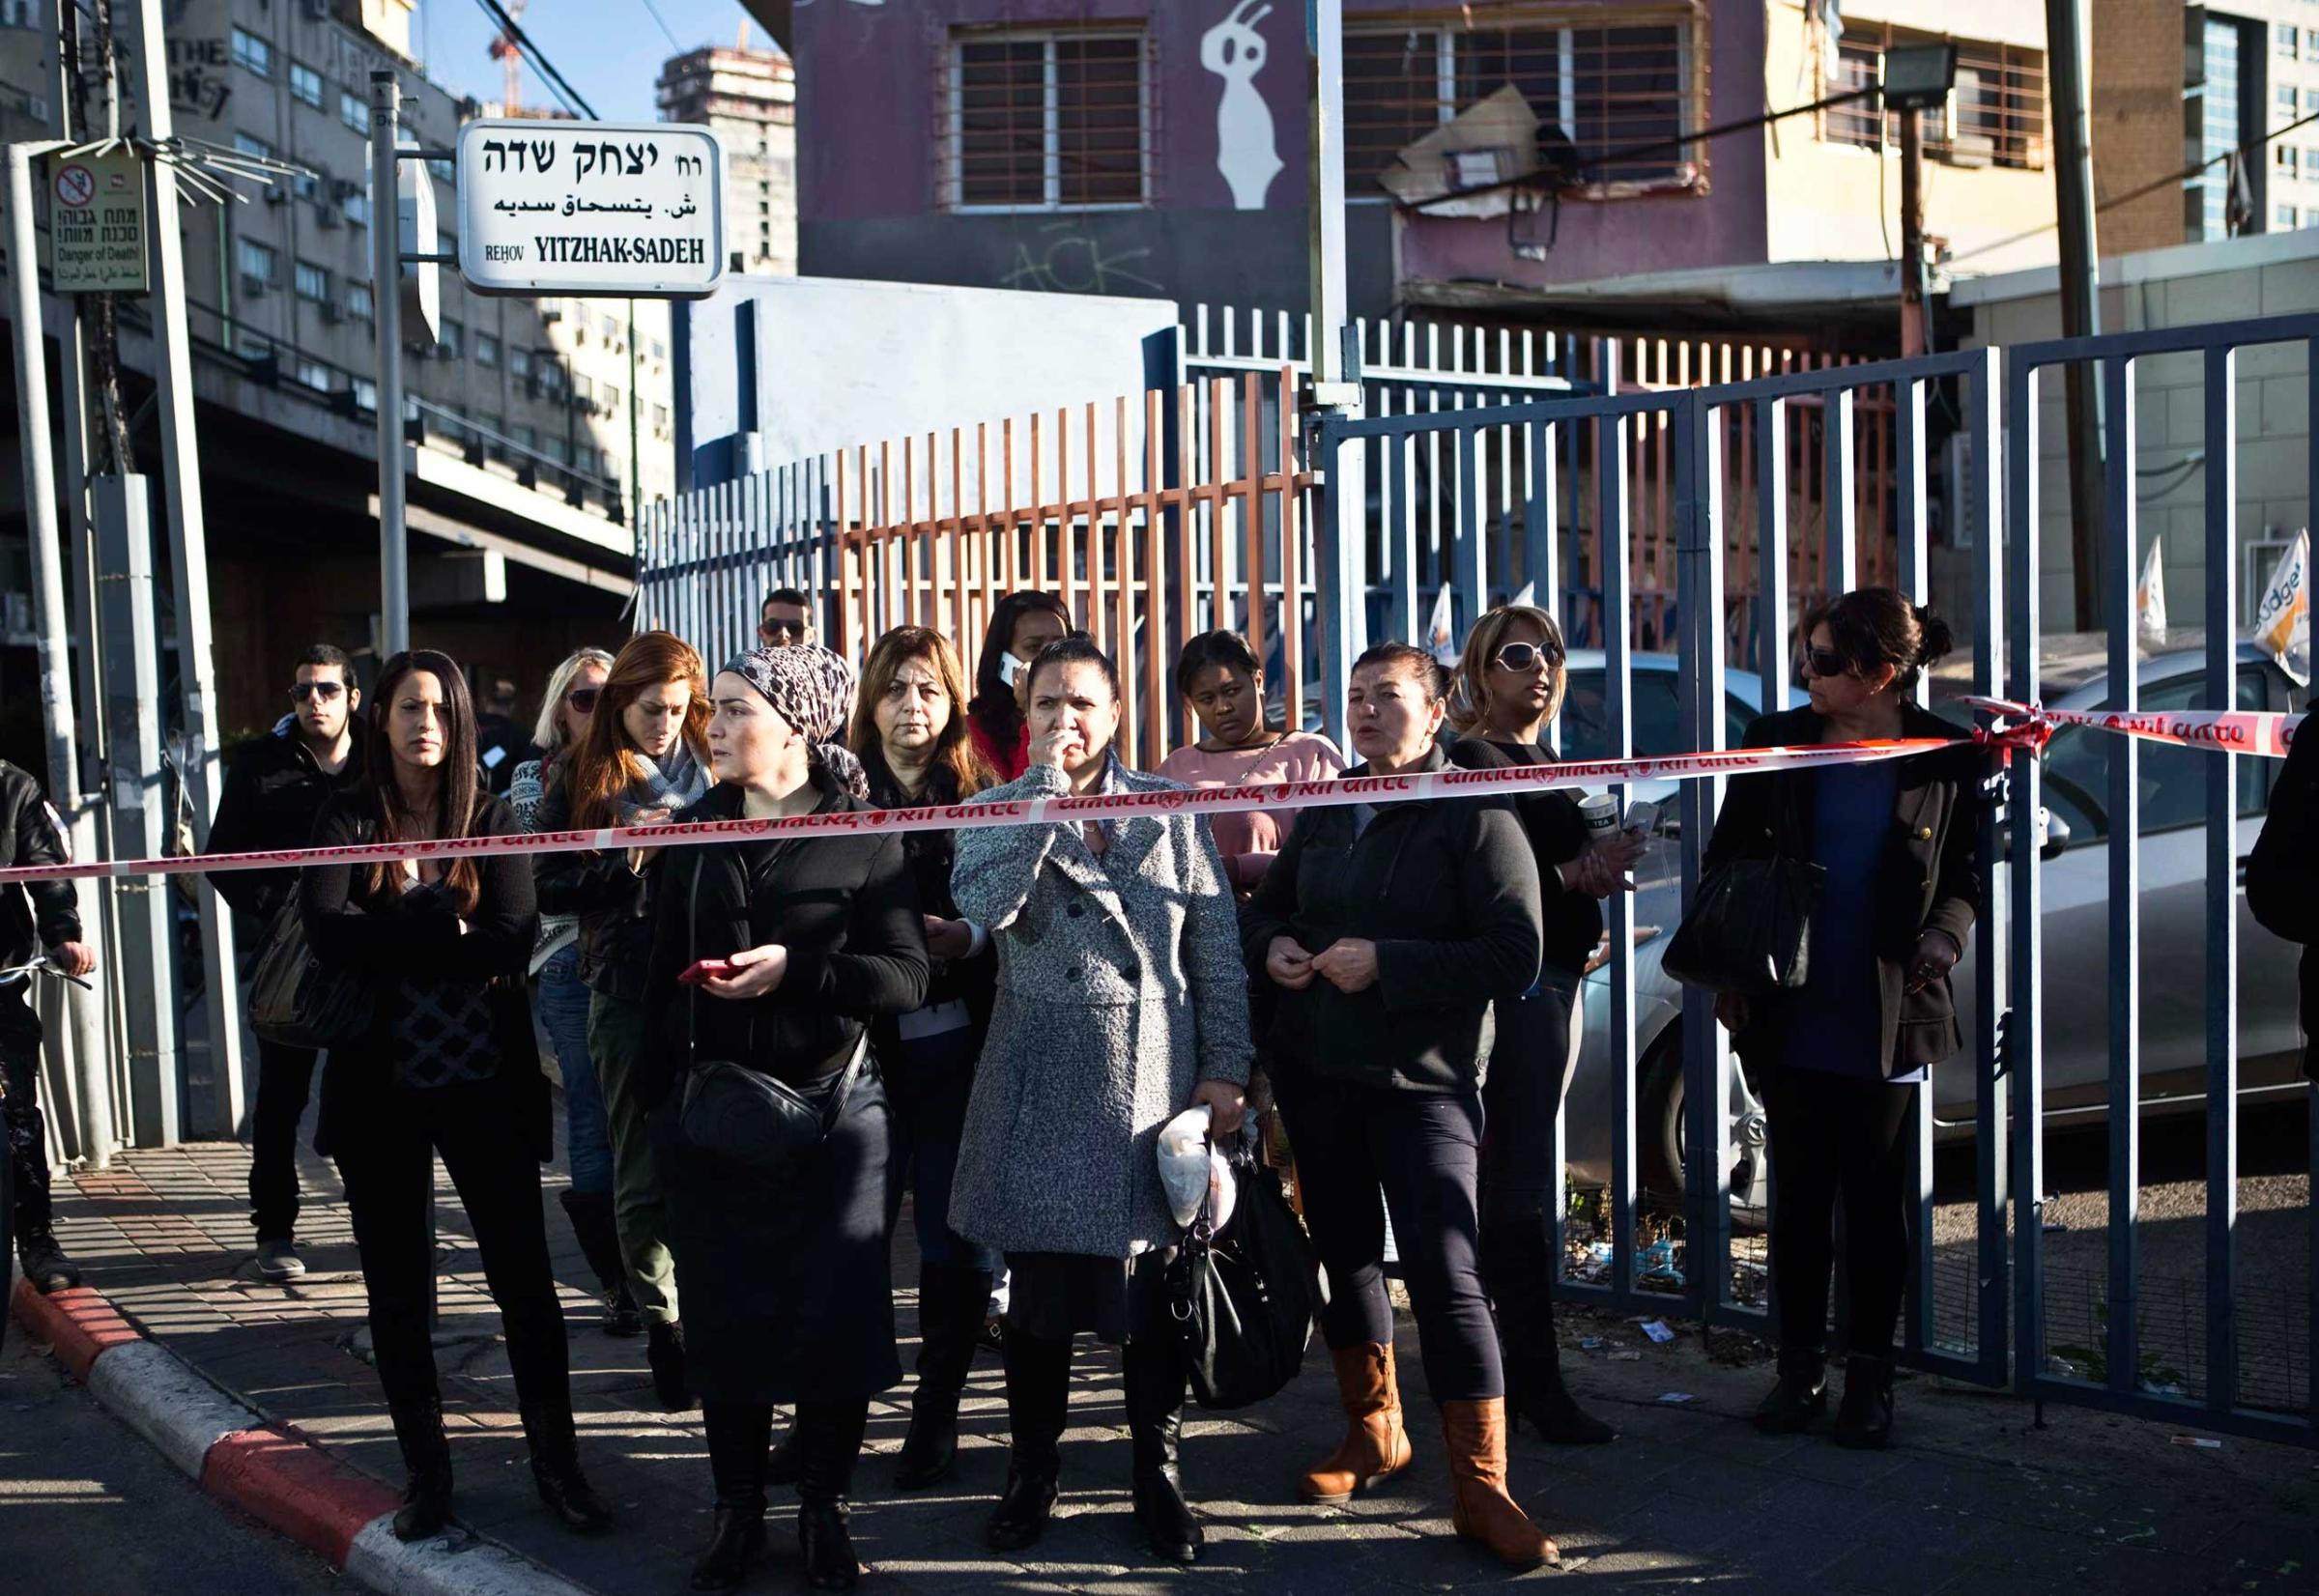 Passers-by stand behind a police tape at the scene of a stabbing attack in Tel Aviv, Jan. 21, 2015.